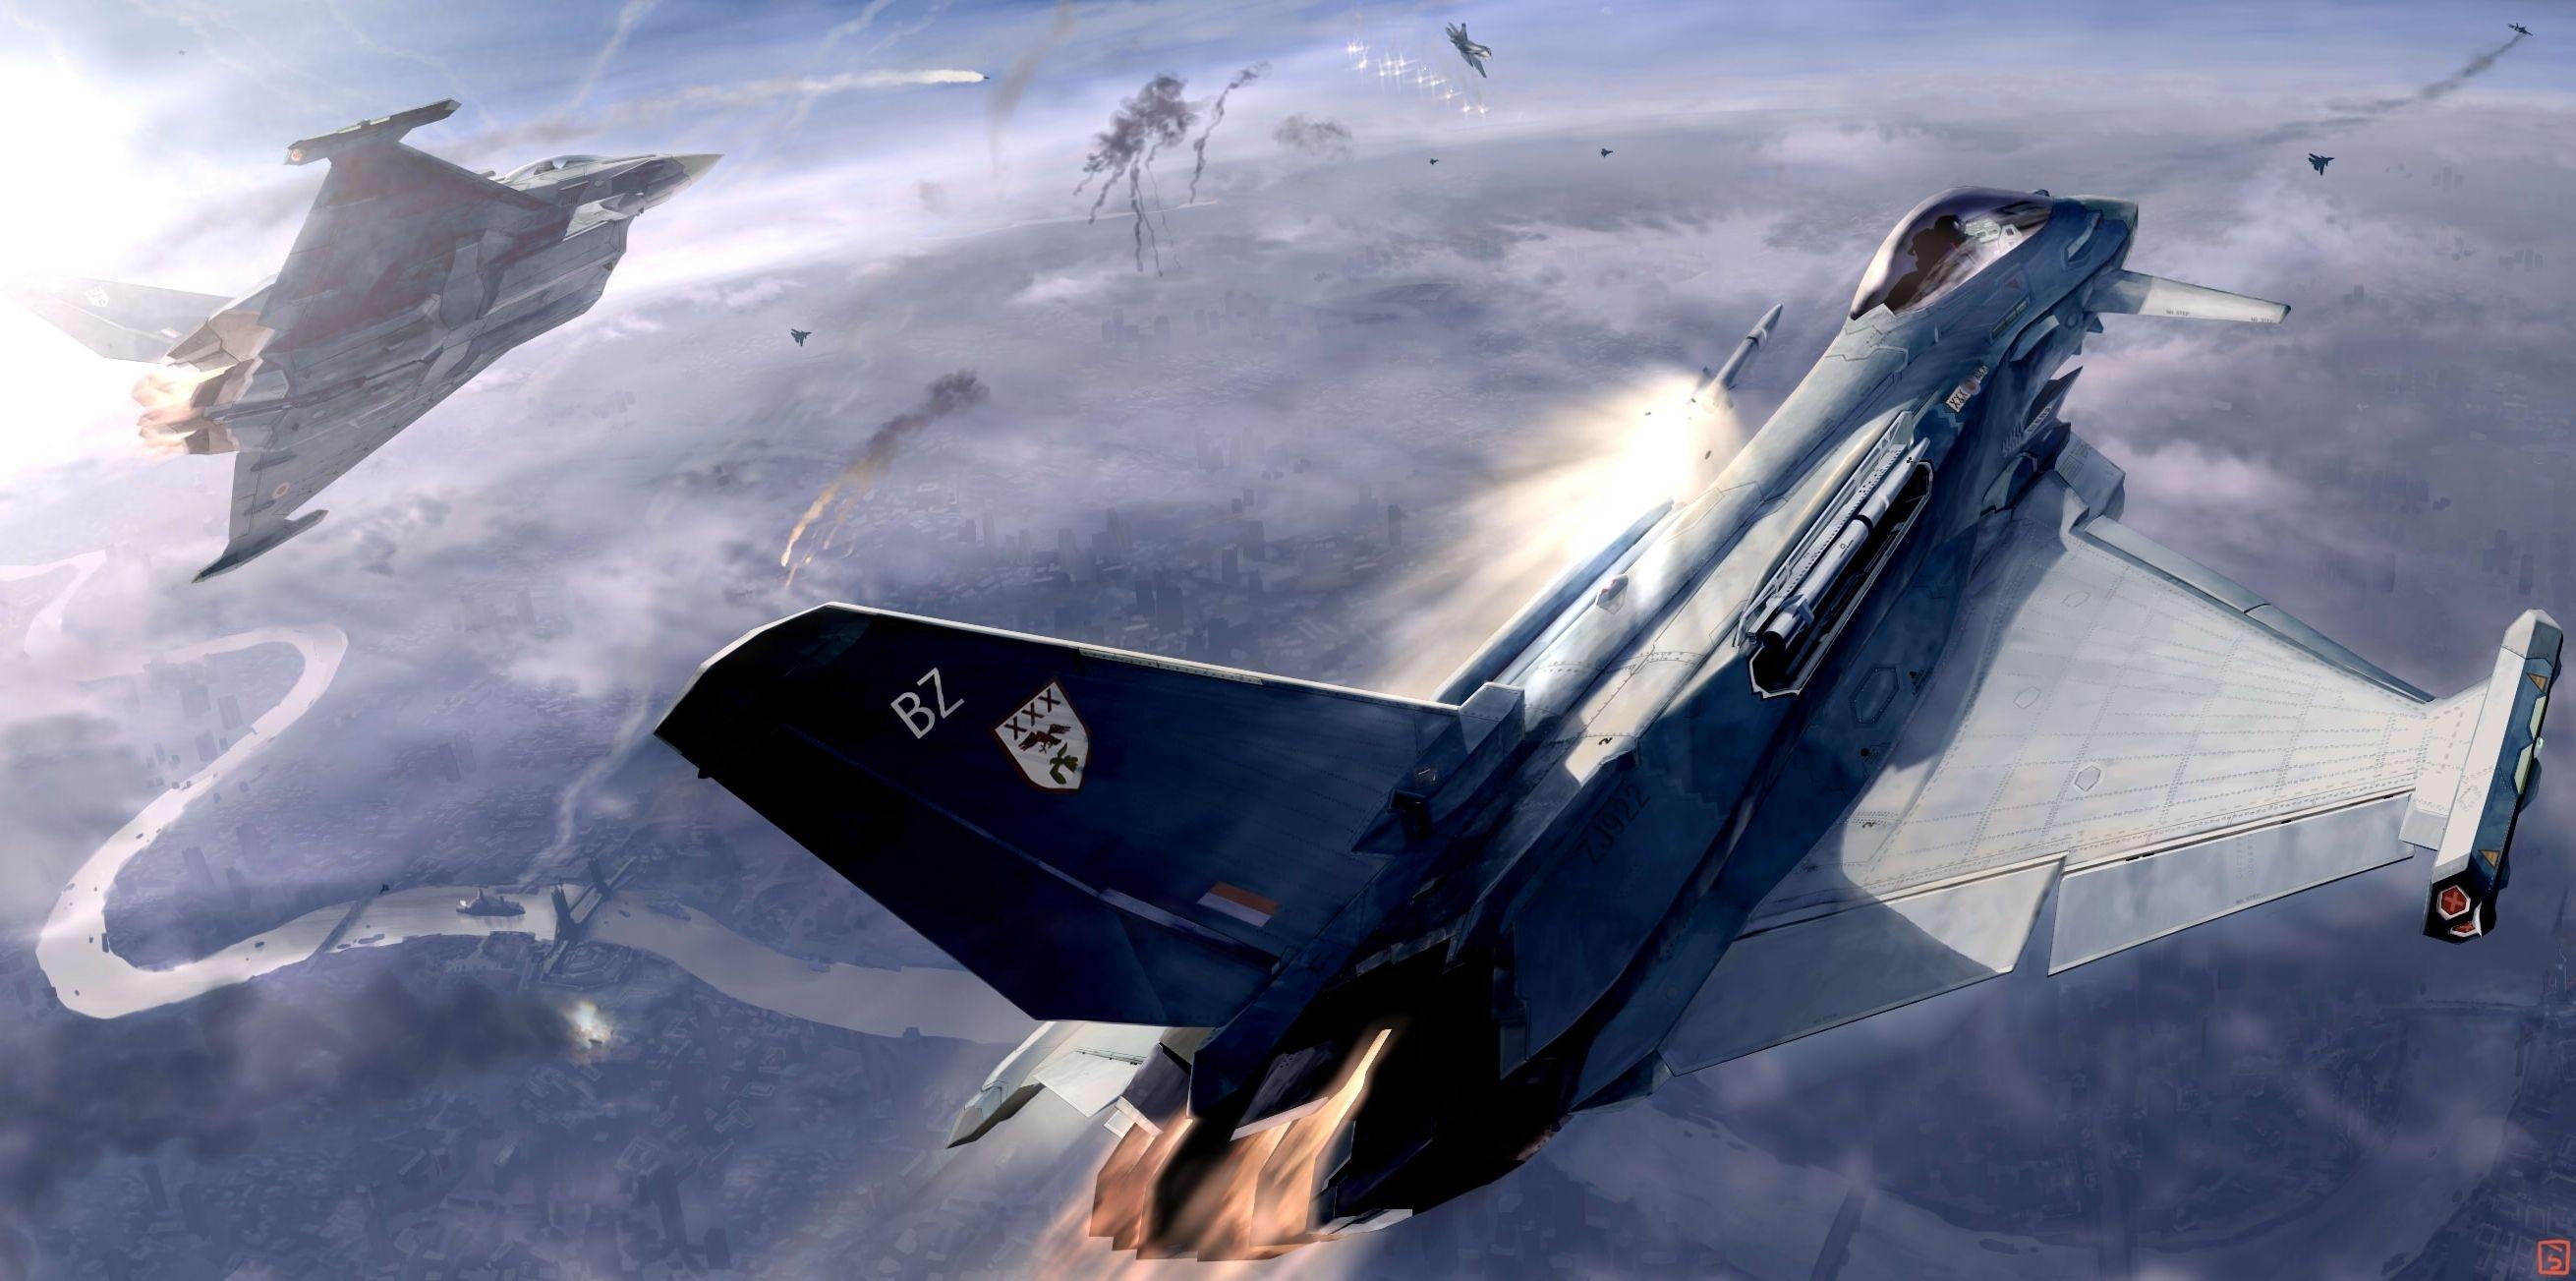 ACE COMBAT game jet airplane aircraft fighter plane military